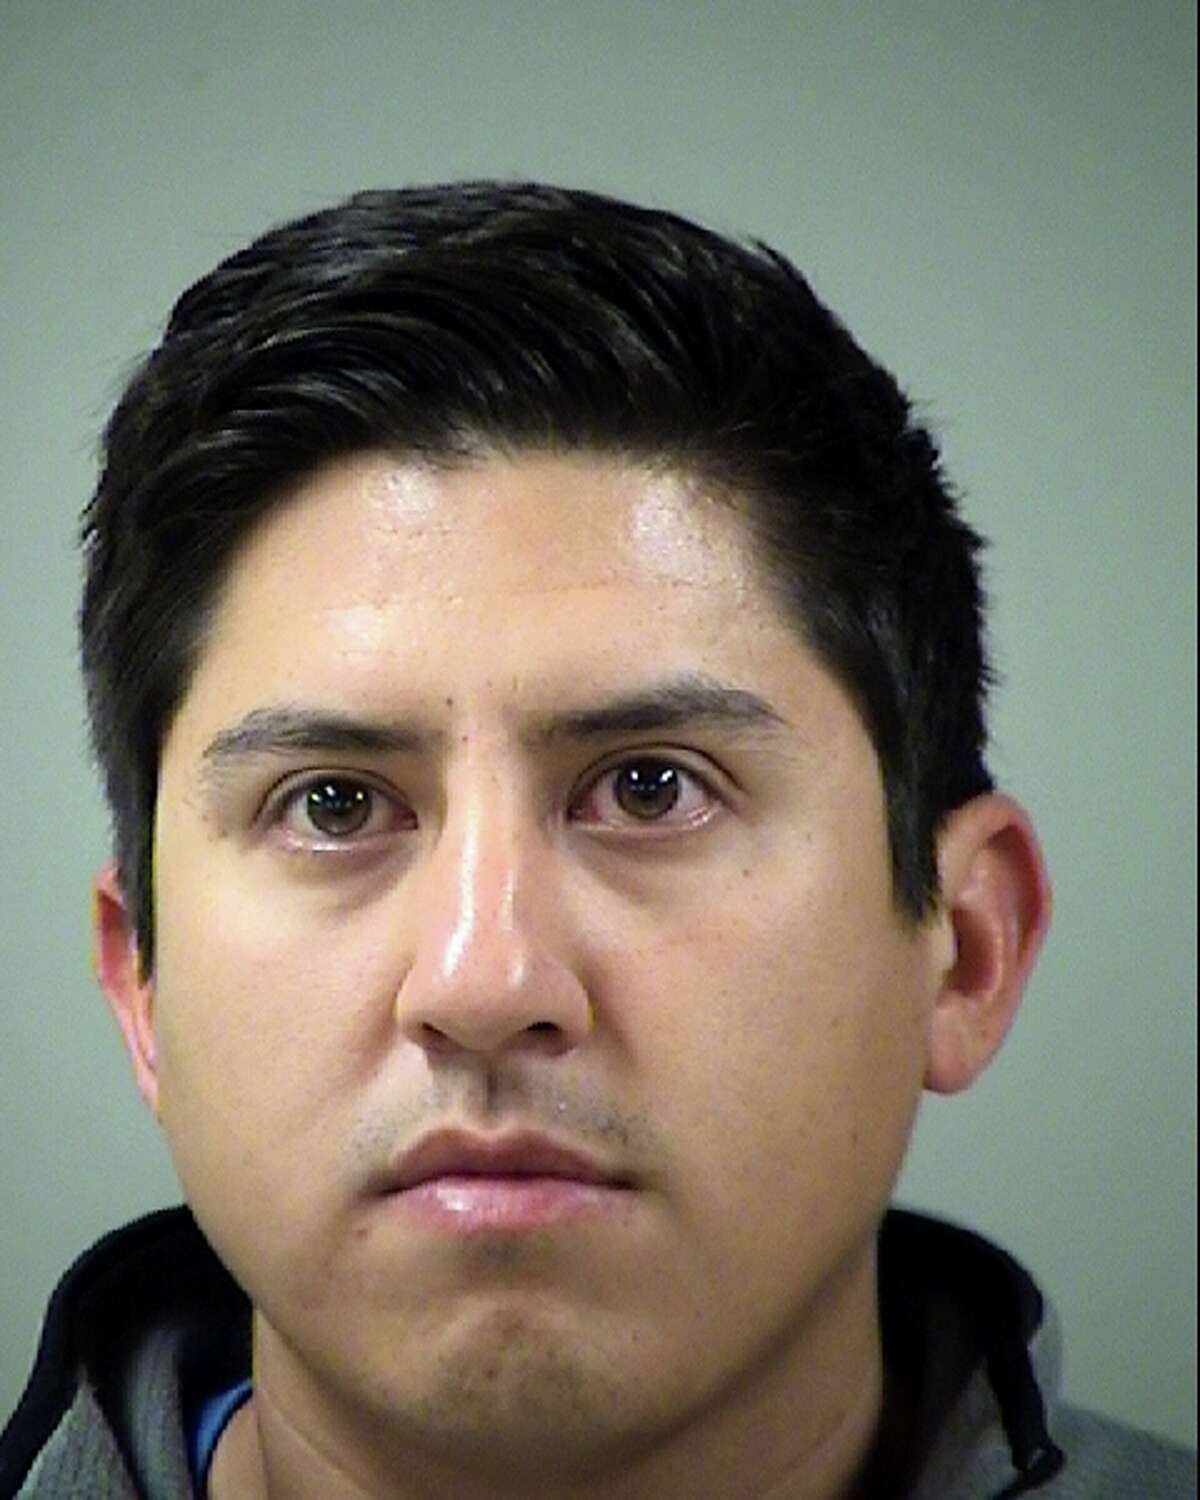 Lauro "Larry" Eduard Ruiz, seen in an undated booking mug provided Saturday March 1, 2014 by the Bexar County Sheriff Department, was arrested Friday Feb. 28, 2014 by Castle Hills Police Department officers and charged with Improper Photography. Ruiz is accused of taking so-called "up-skirt" pictures of female students at Antonian High School, where he used to teach and coach before being fired this week.